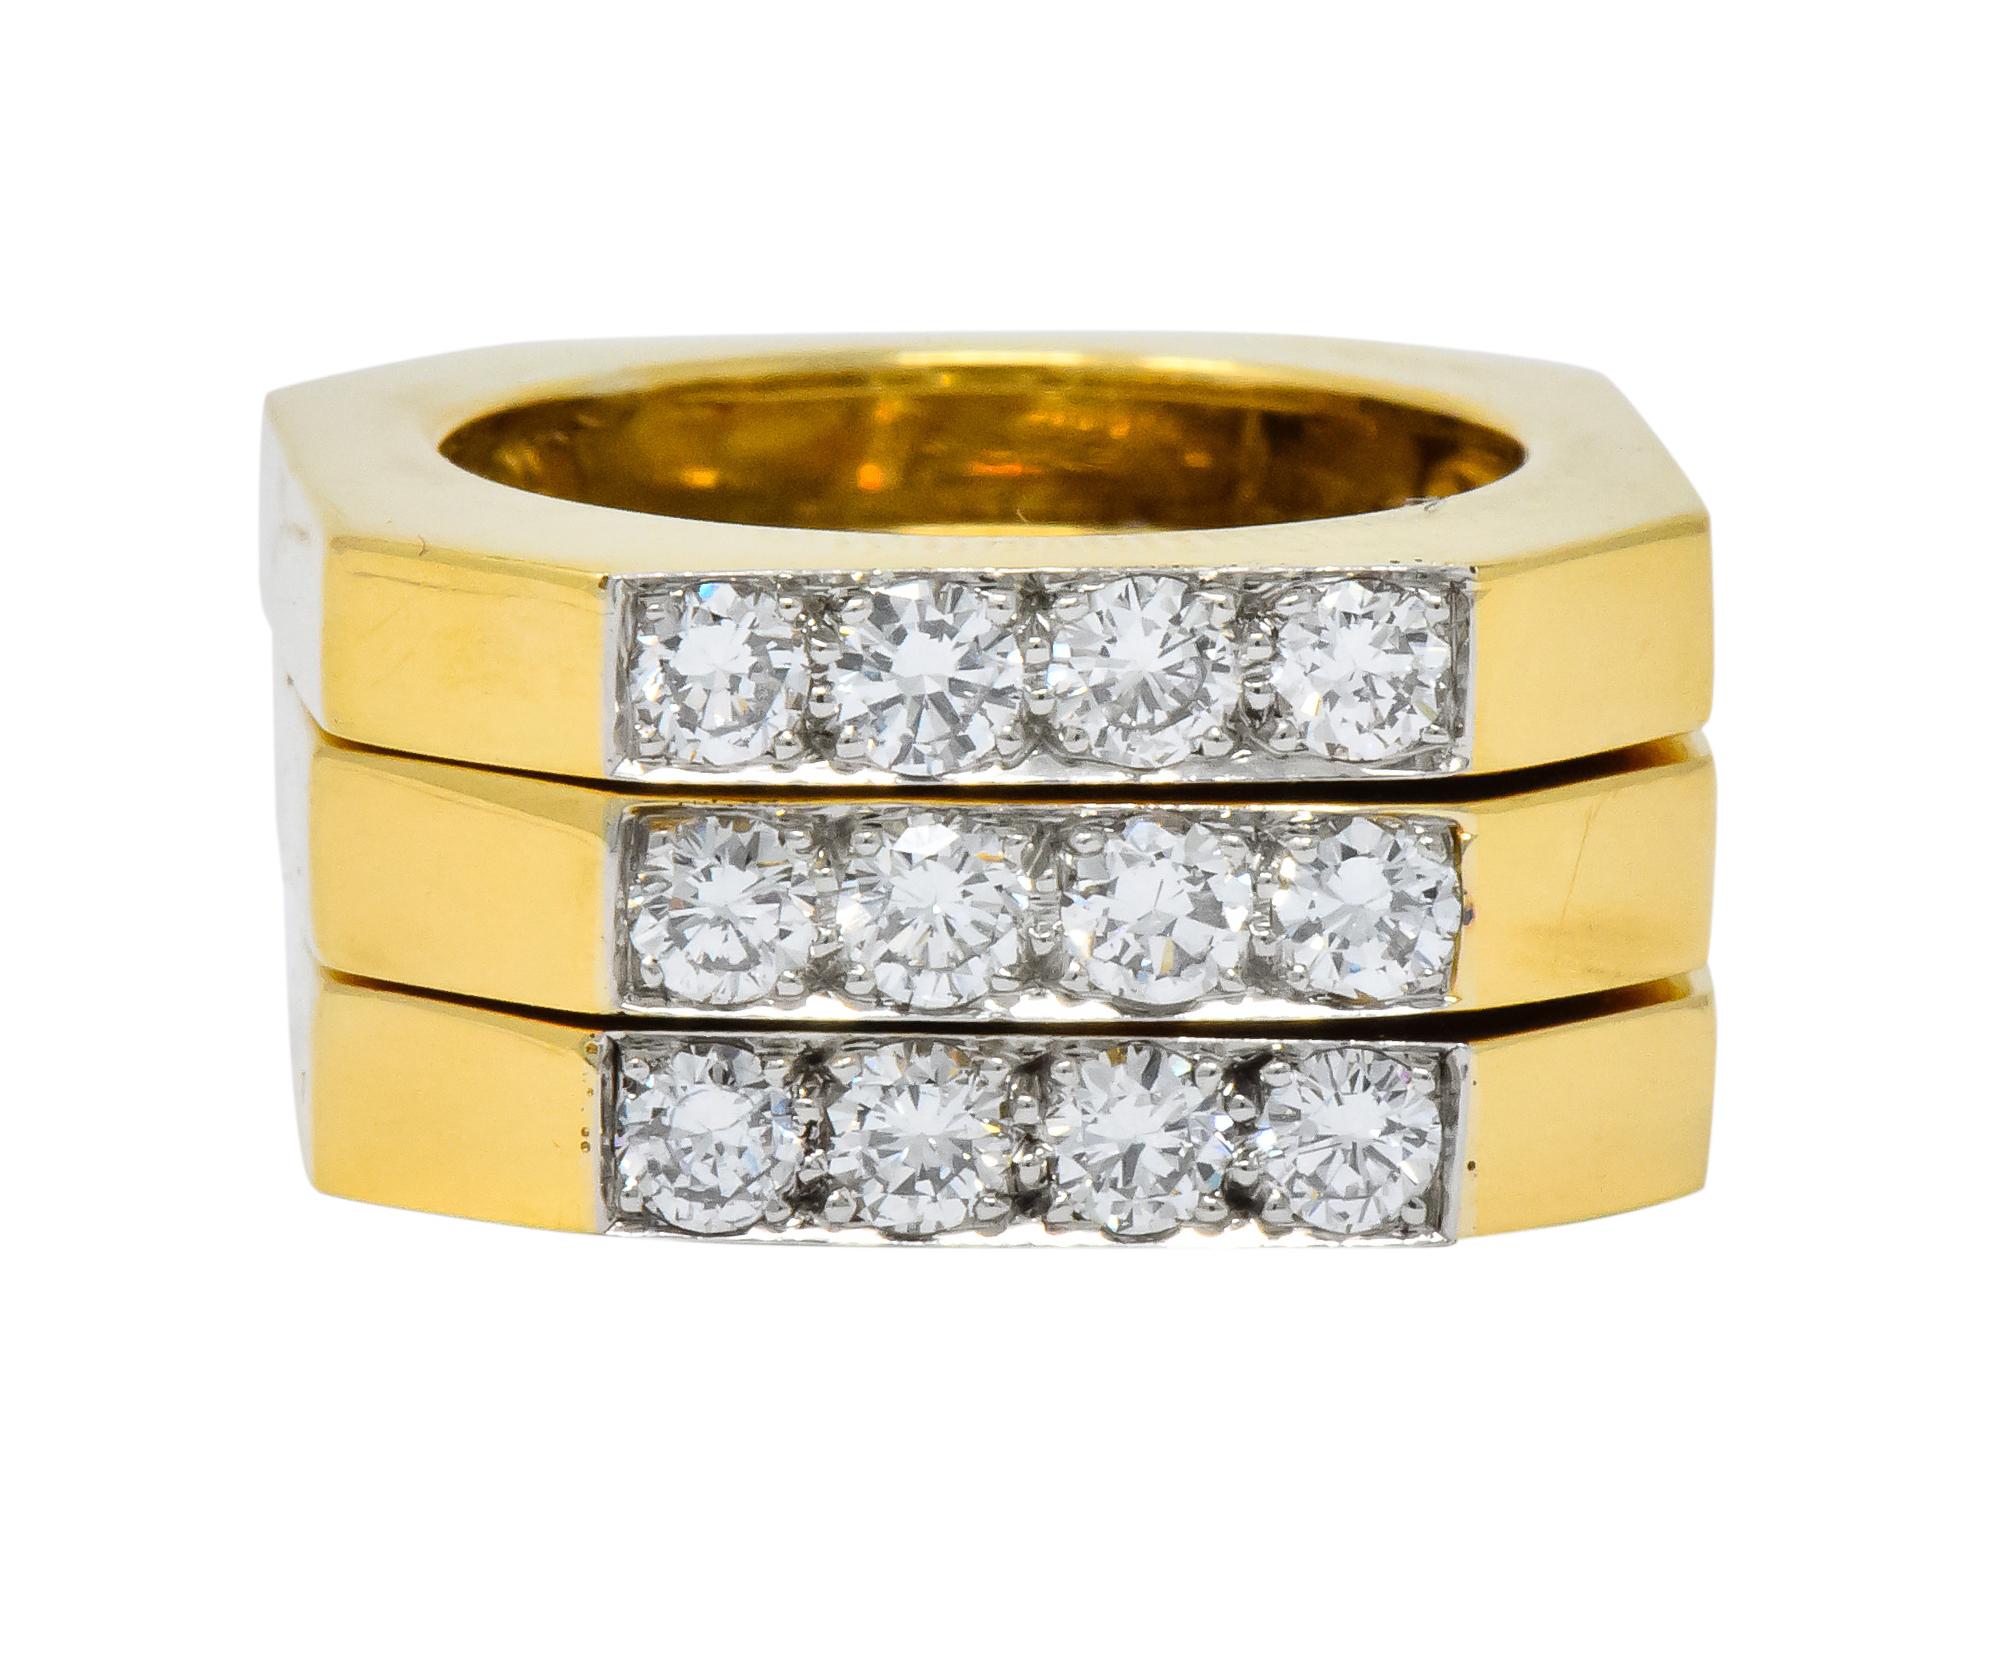 Designed as three high polished gold octagonal stacking rings

Each centering four round brilliant cut diamonds, bead set in platinum, weighing approximately 0.61 carat total, H/I color and VS clarity

Each signed Webb for David Webb with stamps for